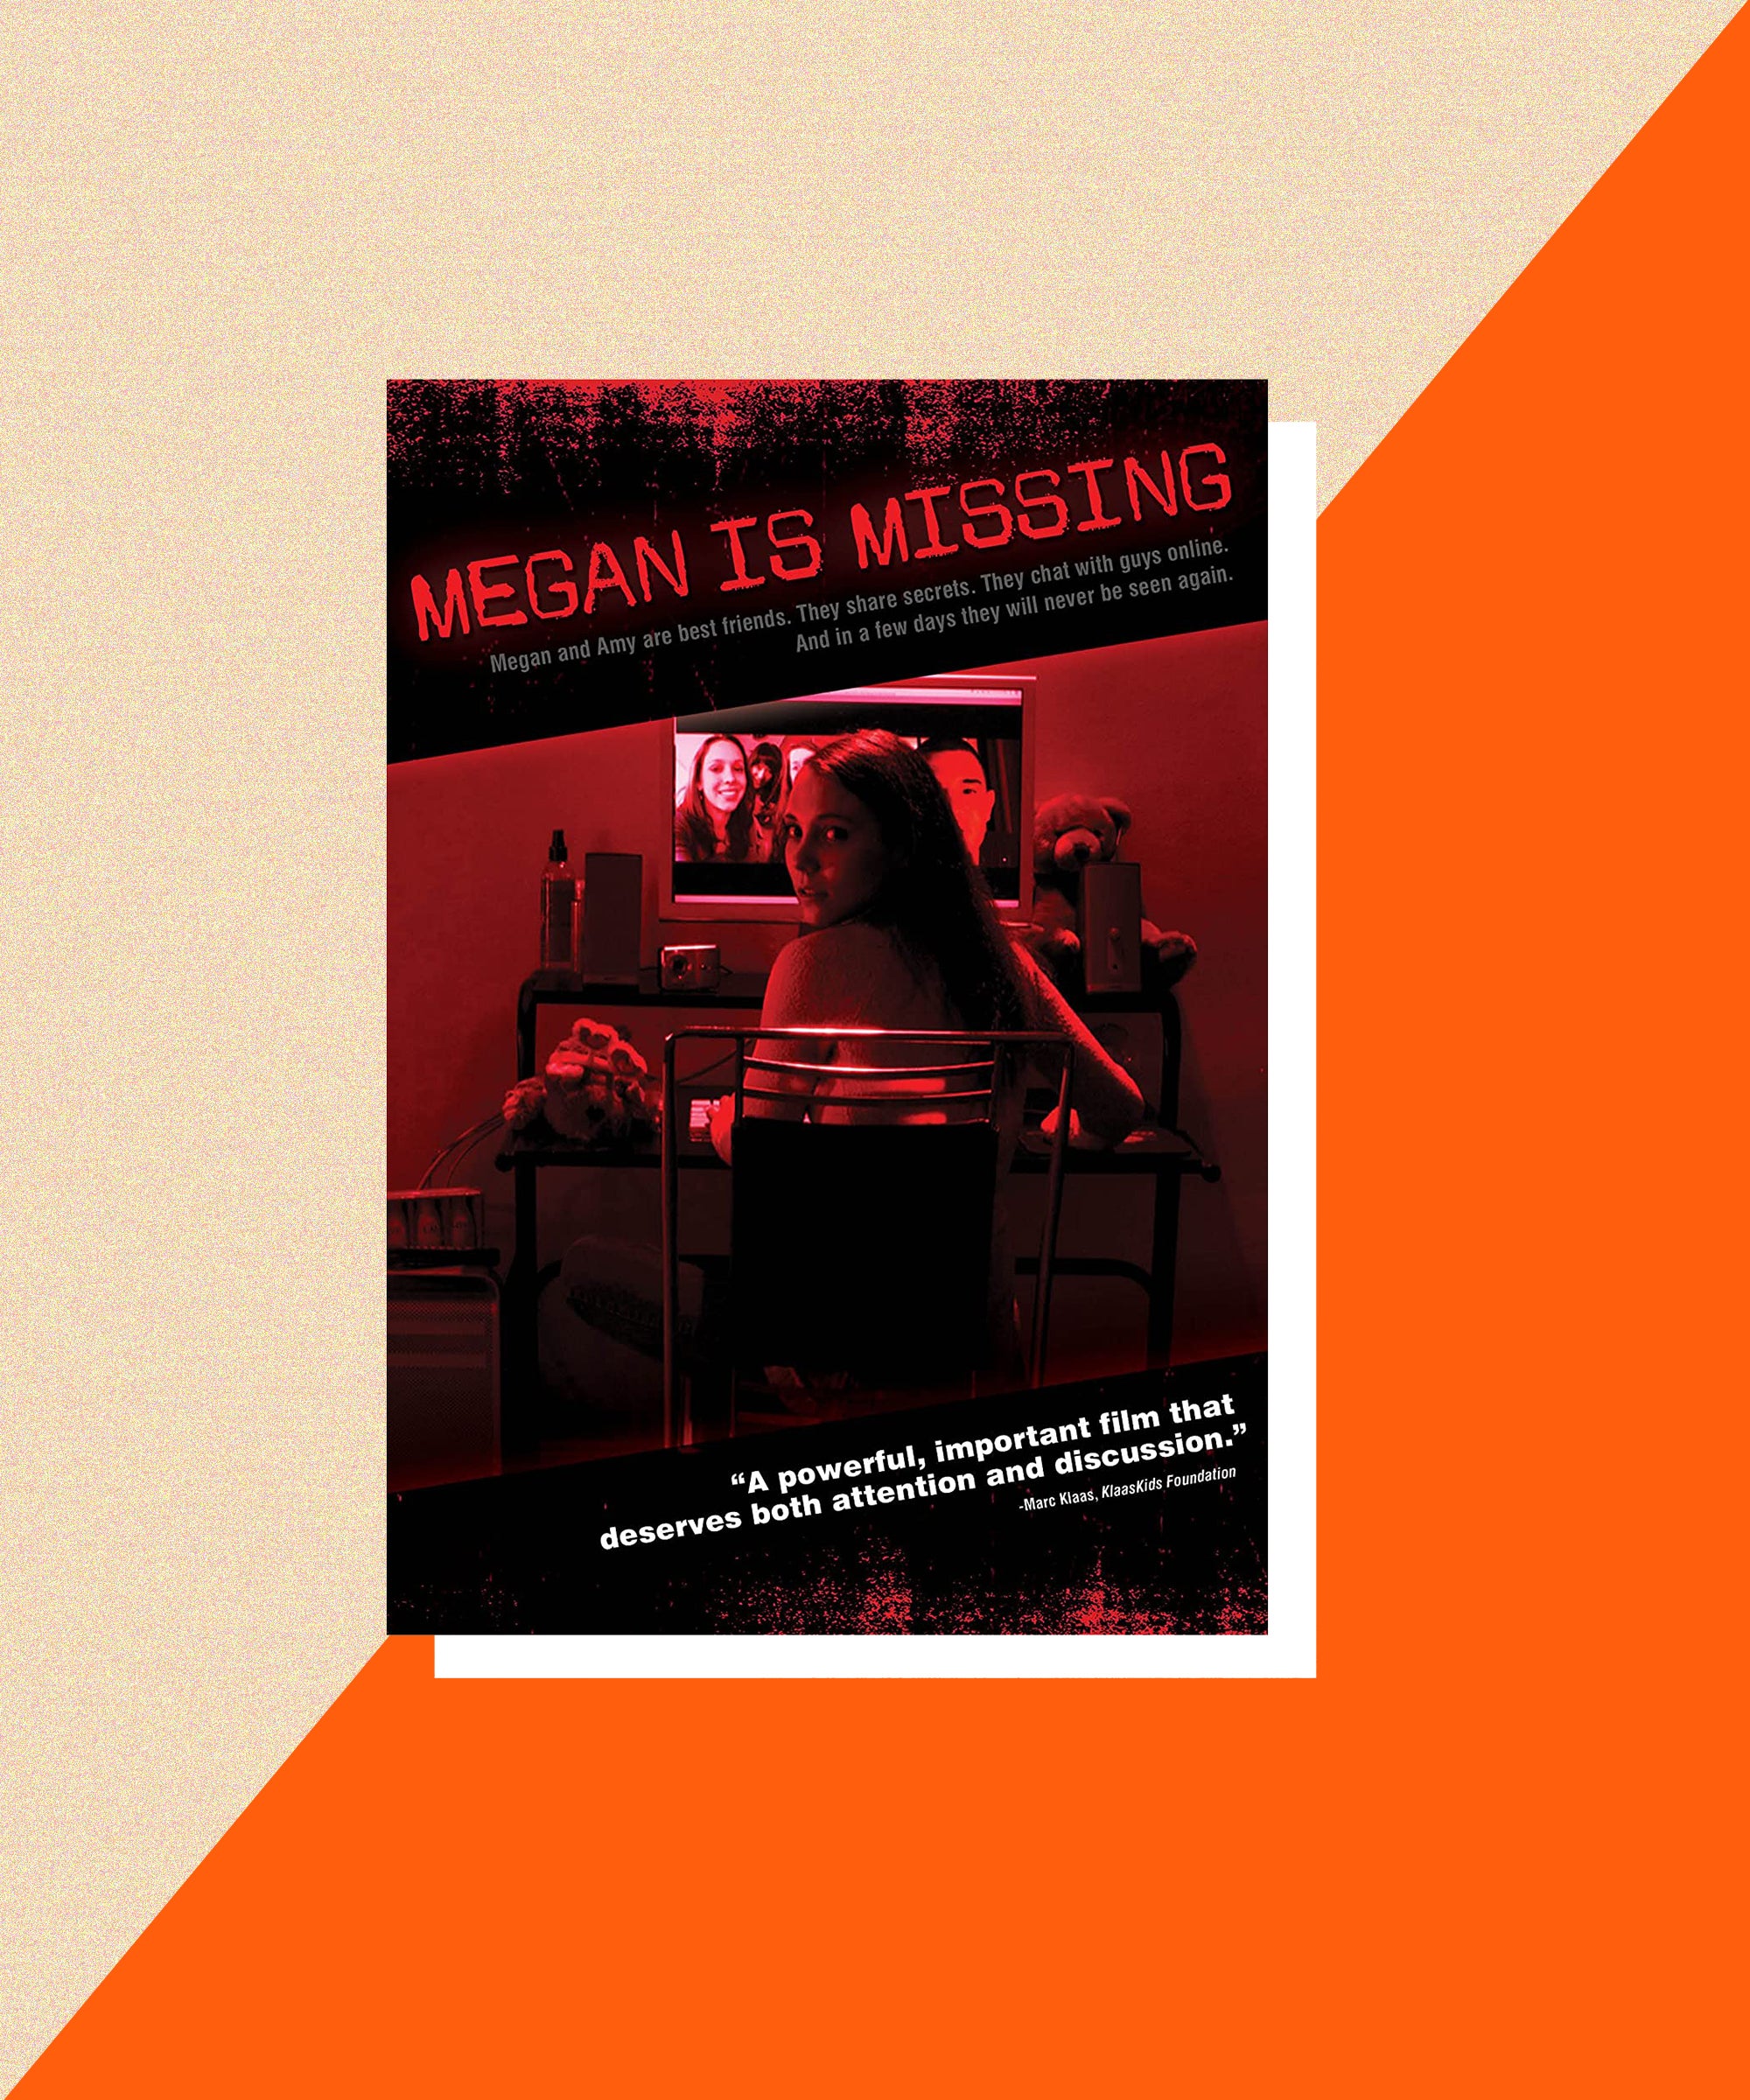 Is Megan Is Missing a True Story? Ending Explained - News